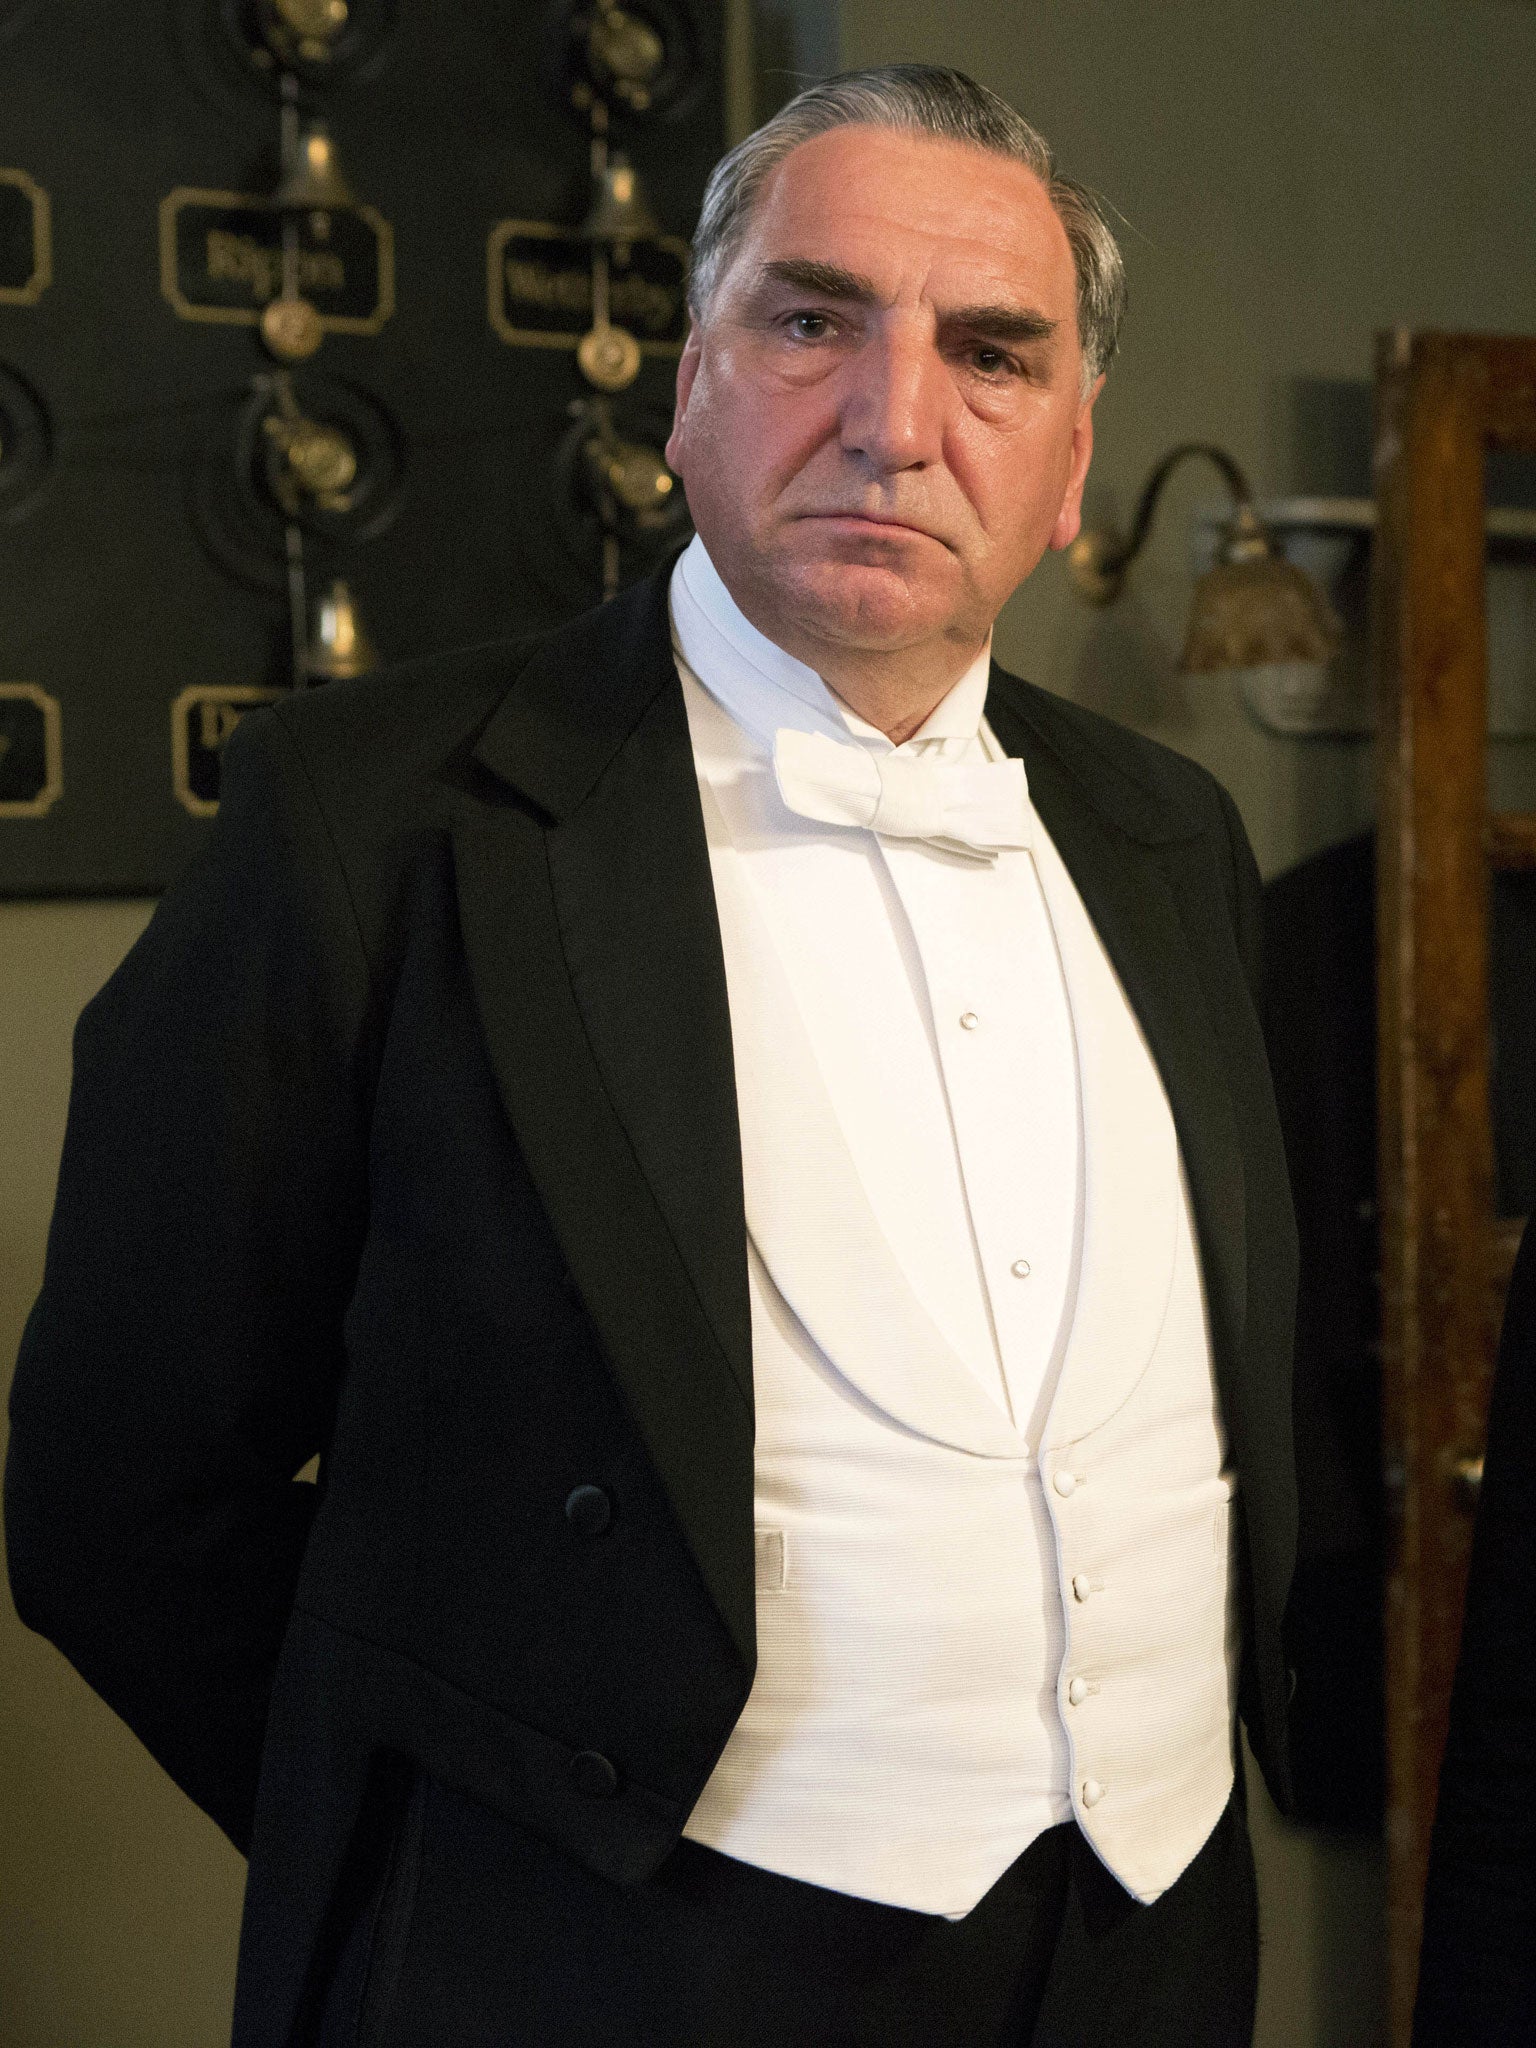 Page 3 Profile: Jim Carter, actor | The Independent